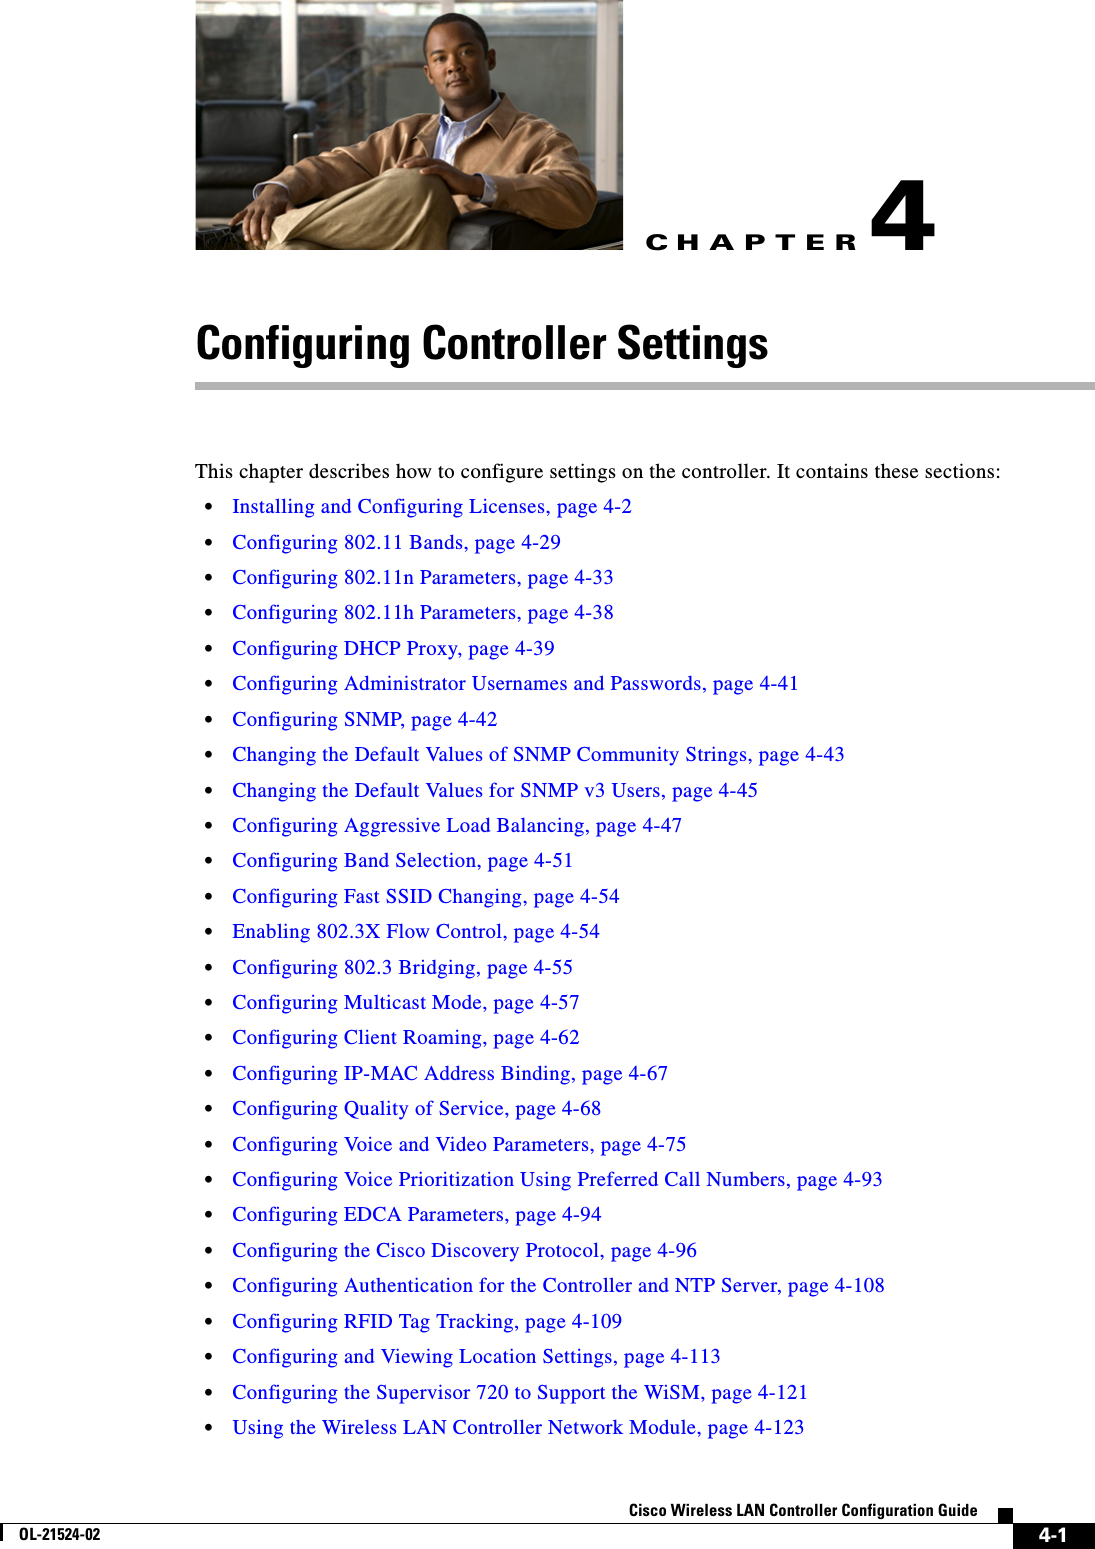 CHAPTER4-1Cisco Wireless LAN Controller Configuration GuideOL-21524-024Configuring Controller SettingsThis chapter describes how to configure settings on the controller. It contains these sections:  • Installing and Configuring Licenses, page 4-2  • Configuring 802.11 Bands, page 4-29  • Configuring 802.11n Parameters, page 4-33  • Configuring 802.11h Parameters, page 4-38  • Configuring DHCP Proxy, page 4-39  • Configuring Administrator Usernames and Passwords, page 4-41  • Configuring SNMP, page 4-42  • Changing the Default Values of SNMP Community Strings, page 4-43  • Changing the Default Values for SNMP v3 Users, page 4-45  • Configuring Aggressive Load Balancing, page 4-47  • Configuring Band Selection, page 4-51  • Configuring Fast SSID Changing, page 4-54  • Enabling 802.3X Flow Control, page 4-54  • Configuring 802.3 Bridging, page 4-55  • Configuring Multicast Mode, page 4-57  • Configuring Client Roaming, page 4-62  • Configuring IP-MAC Address Binding, page 4-67  • Configuring Quality of Service, page 4-68  • Configuring Voice and Video Parameters, page 4-75  • Configuring Voice Prioritization Using Preferred Call Numbers, page 4-93  • Configuring EDCA Parameters, page 4-94  • Configuring the Cisco Discovery Protocol, page 4-96  • Configuring Authentication for the Controller and NTP Server, page 4-108  • Configuring RFID Tag Tracking, page 4-109  • Configuring and Viewing Location Settings, page 4-113  • Configuring the Supervisor 720 to Support the WiSM, page 4-121  • Using the Wireless LAN Controller Network Module, page 4-123